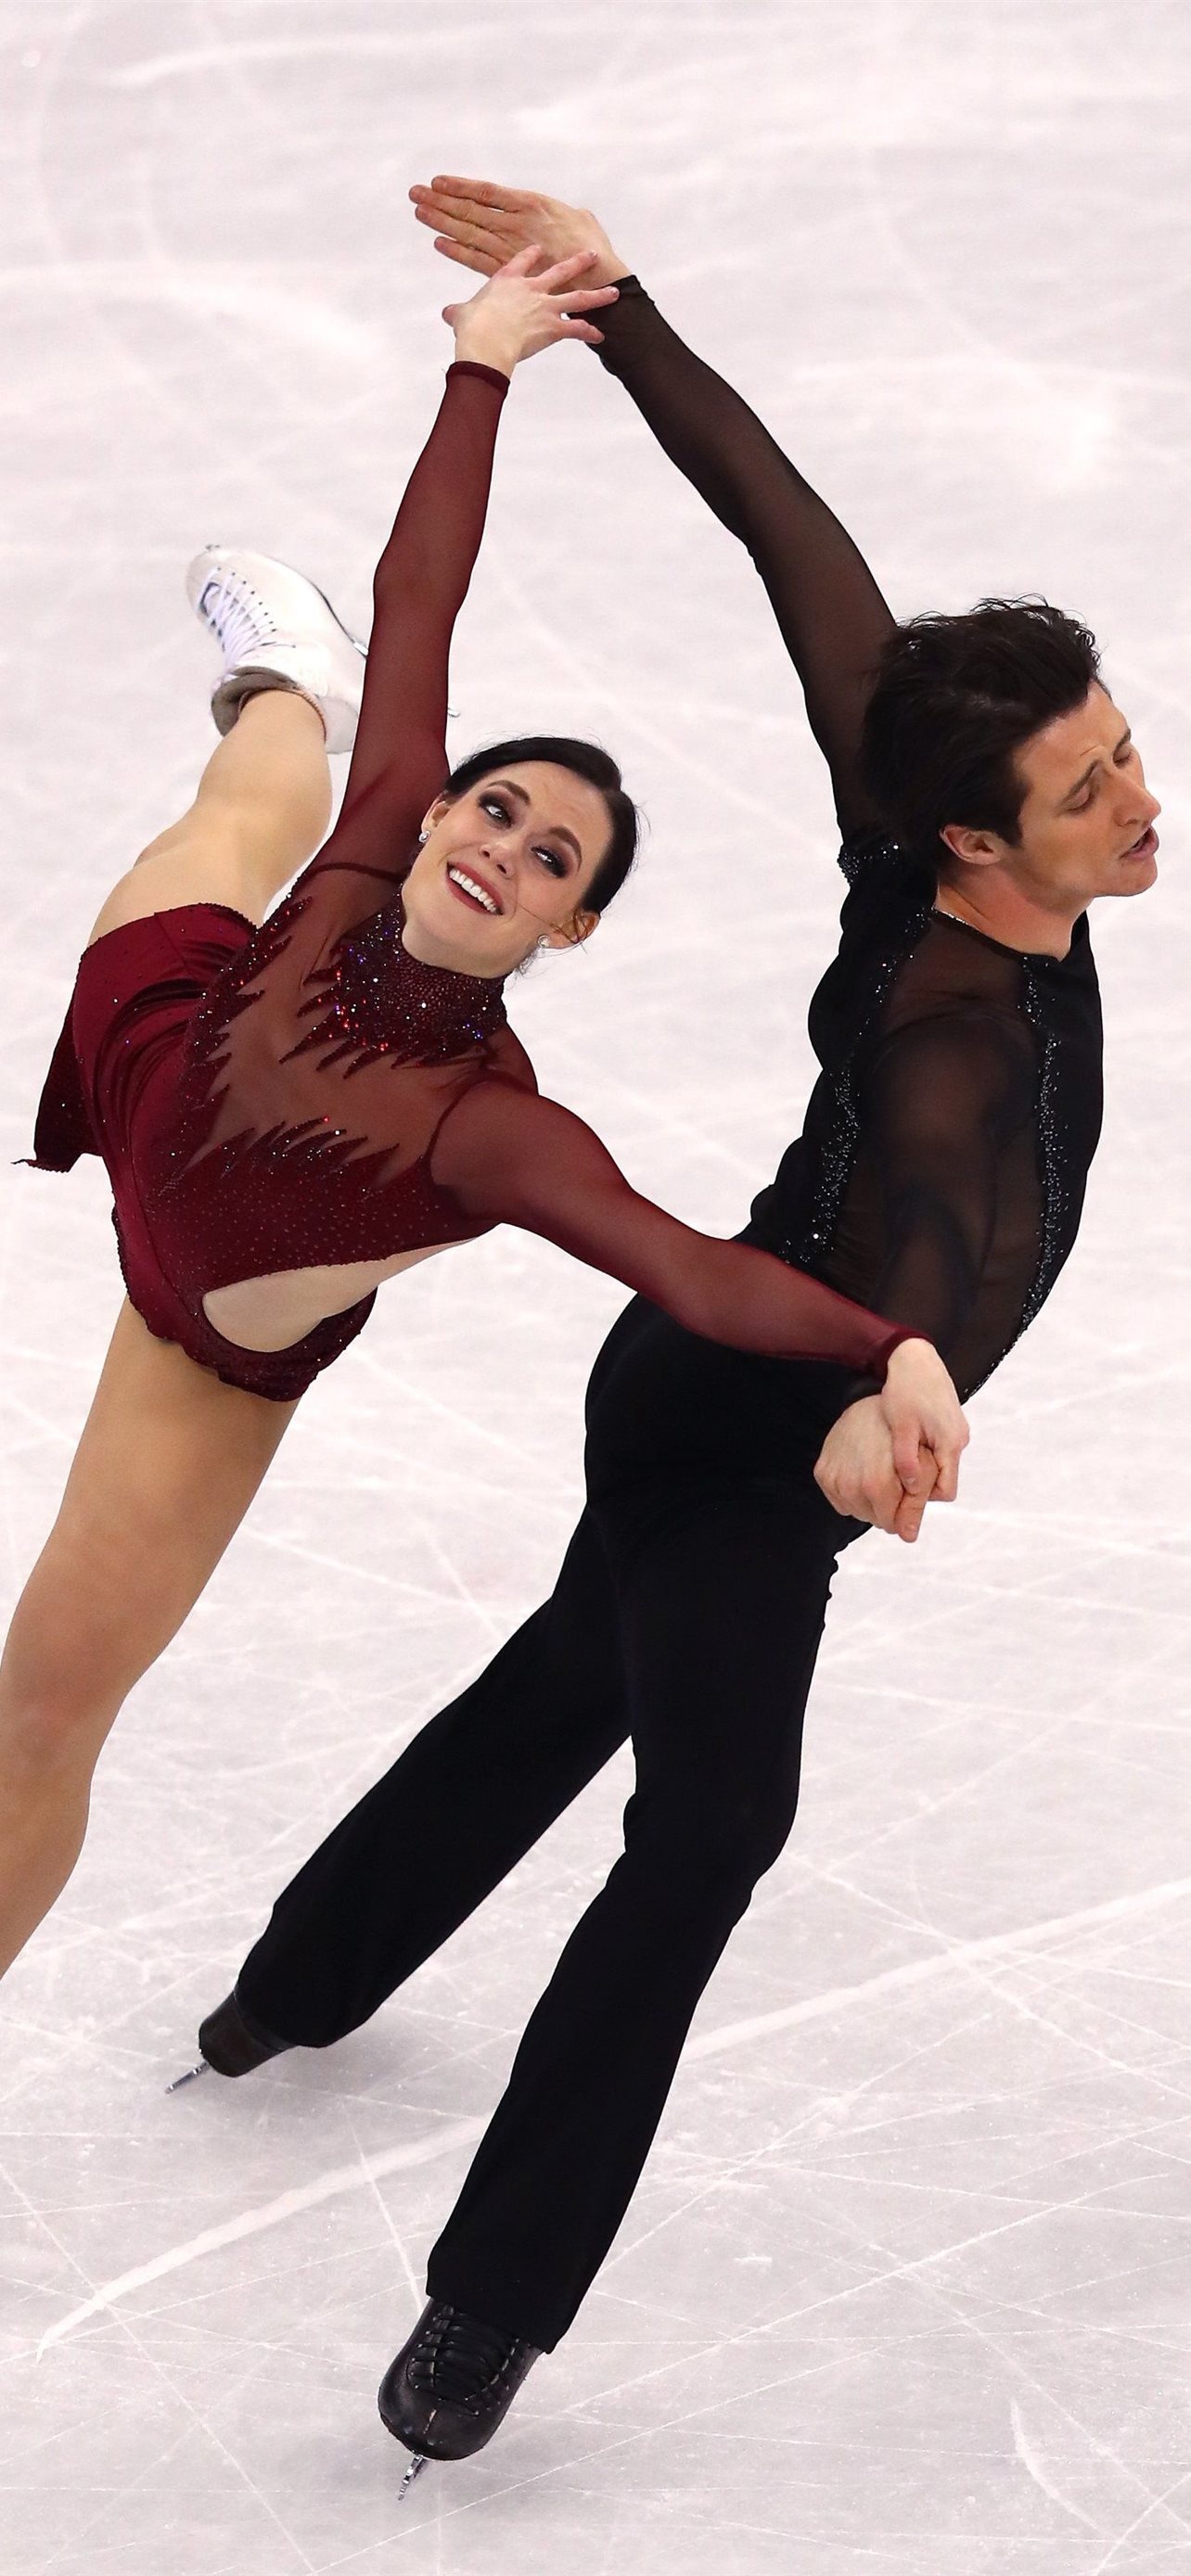 Pair Skating: Tessa Virtue and Scott Moir, Canadian ice dancers, Olympic champions at Vancouver 2010. 1290x2780 HD Background.